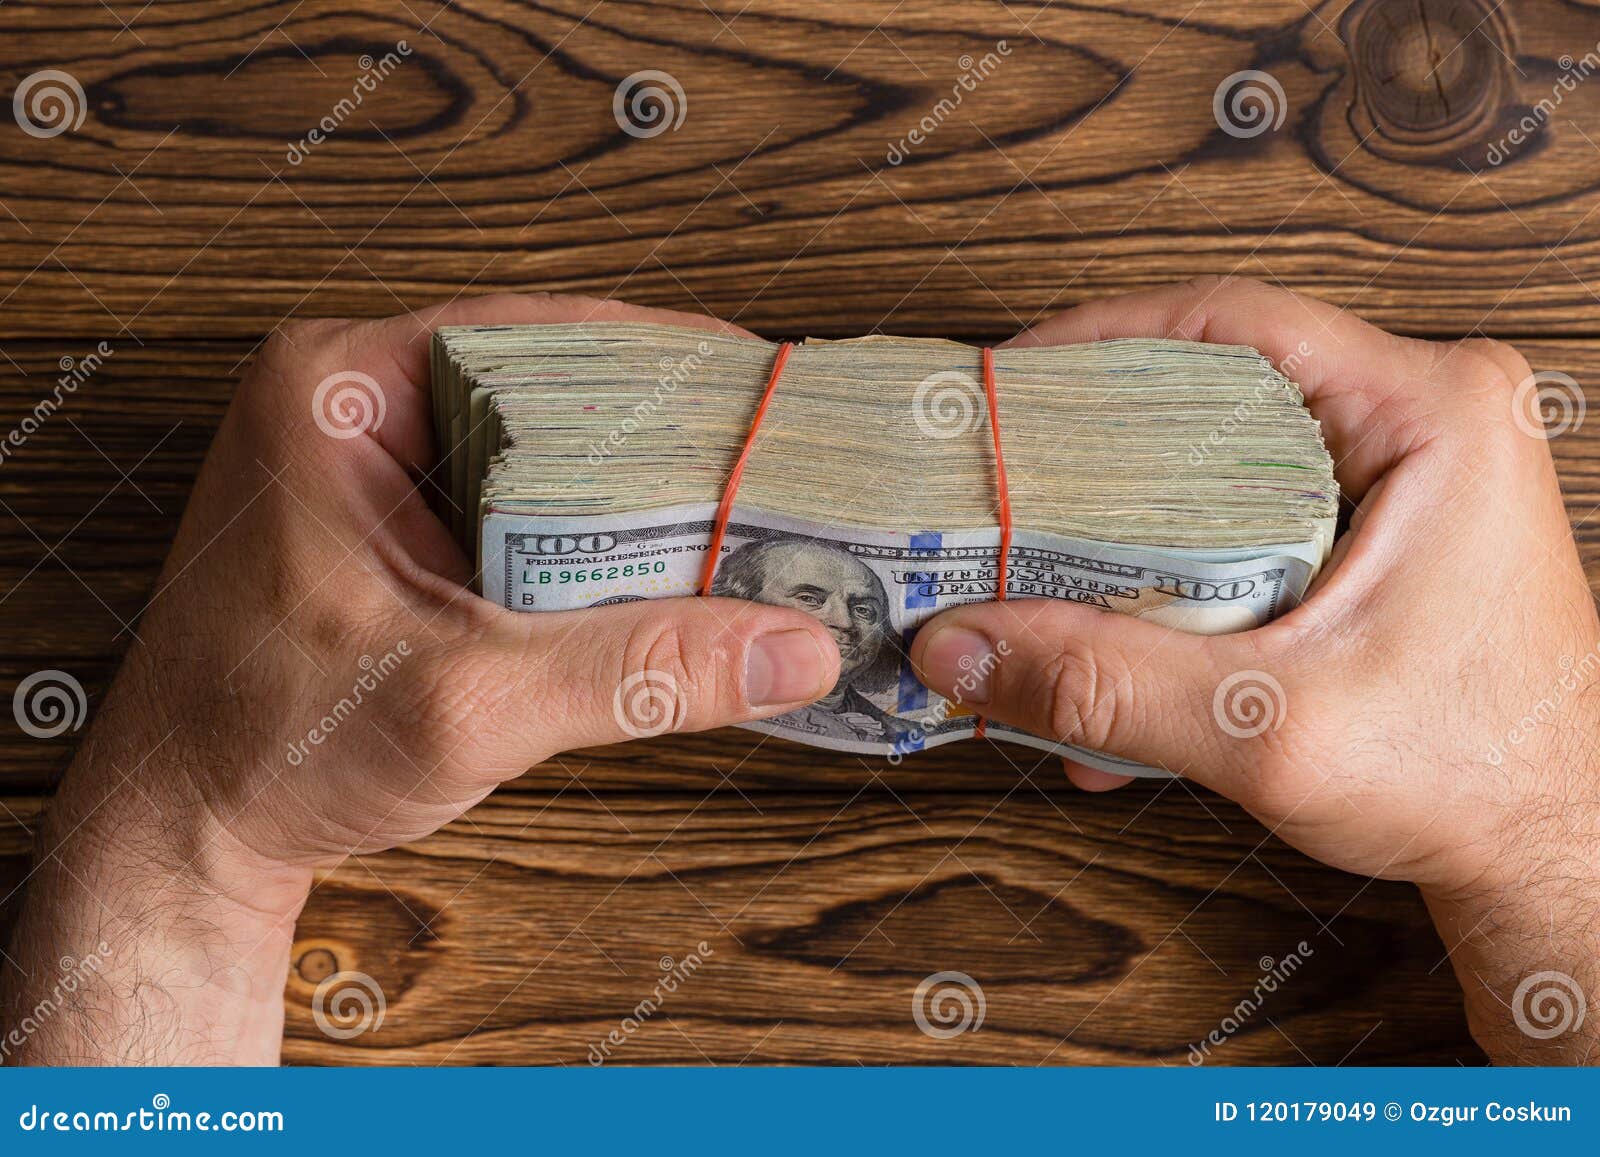 man gripping a thick stack of 100 dollar bills